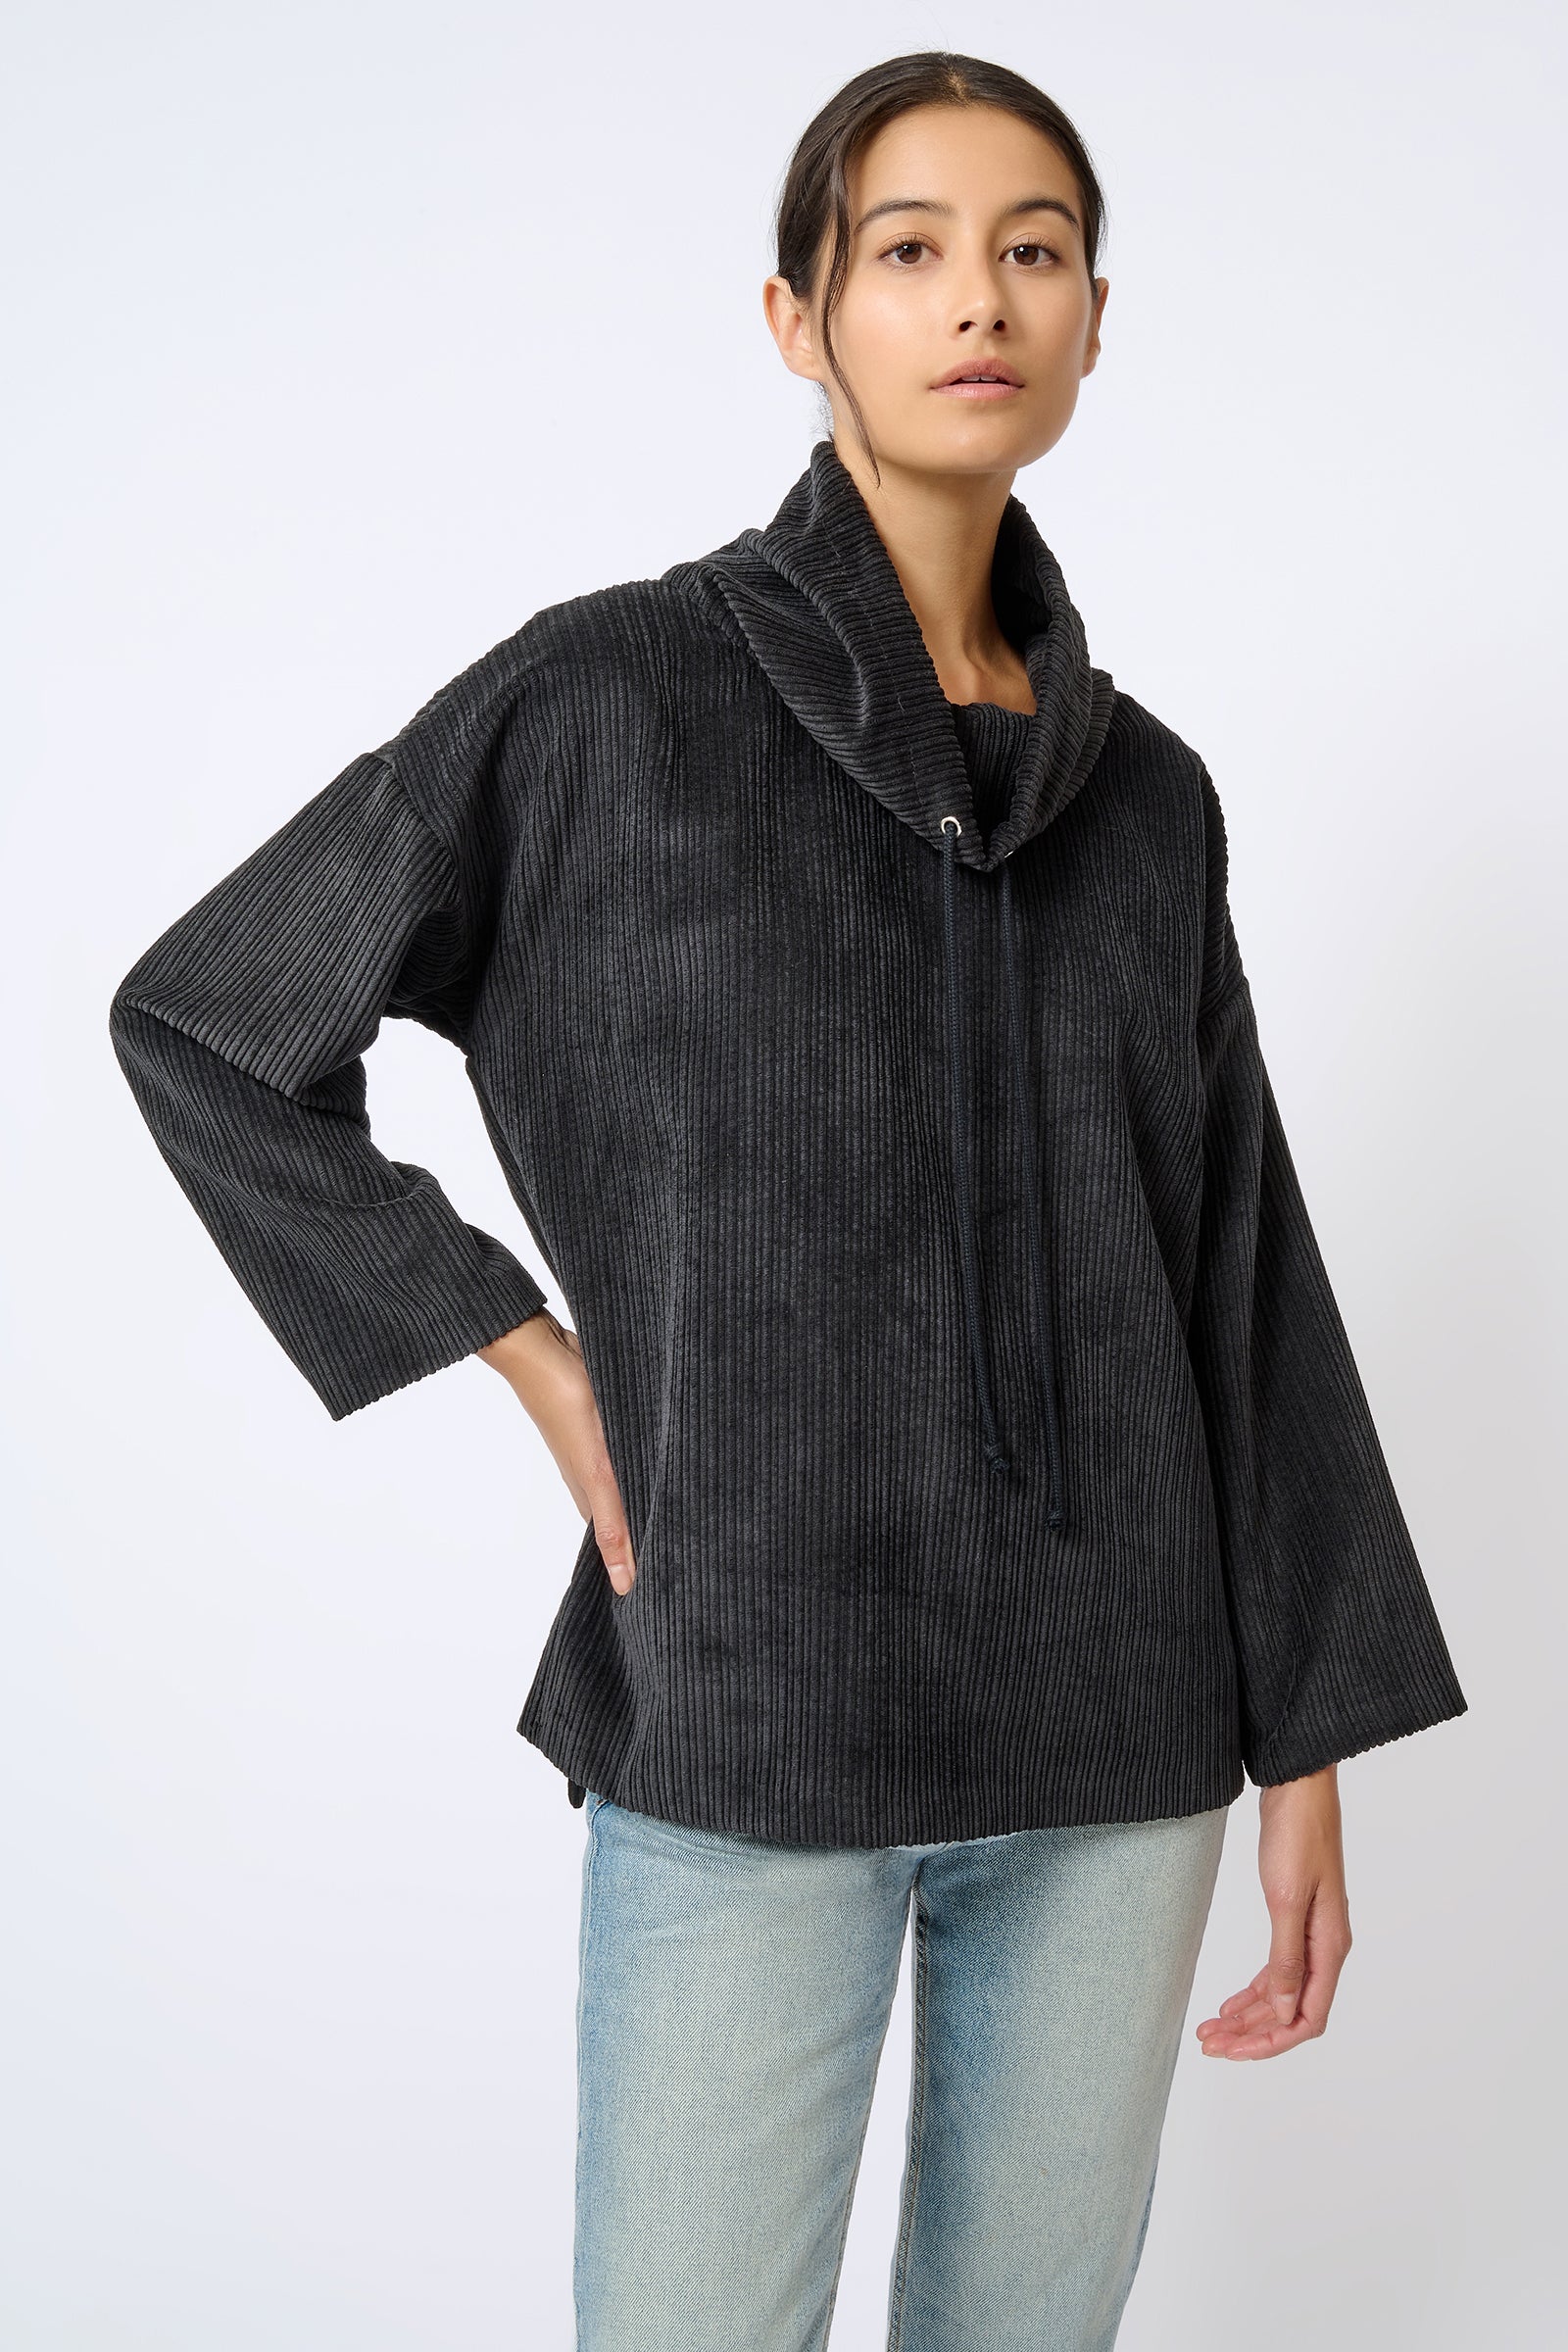 Kal Rieman Debbie Drawstring Pullover in Black on Model with Hand on Hip Looking Forward Front View